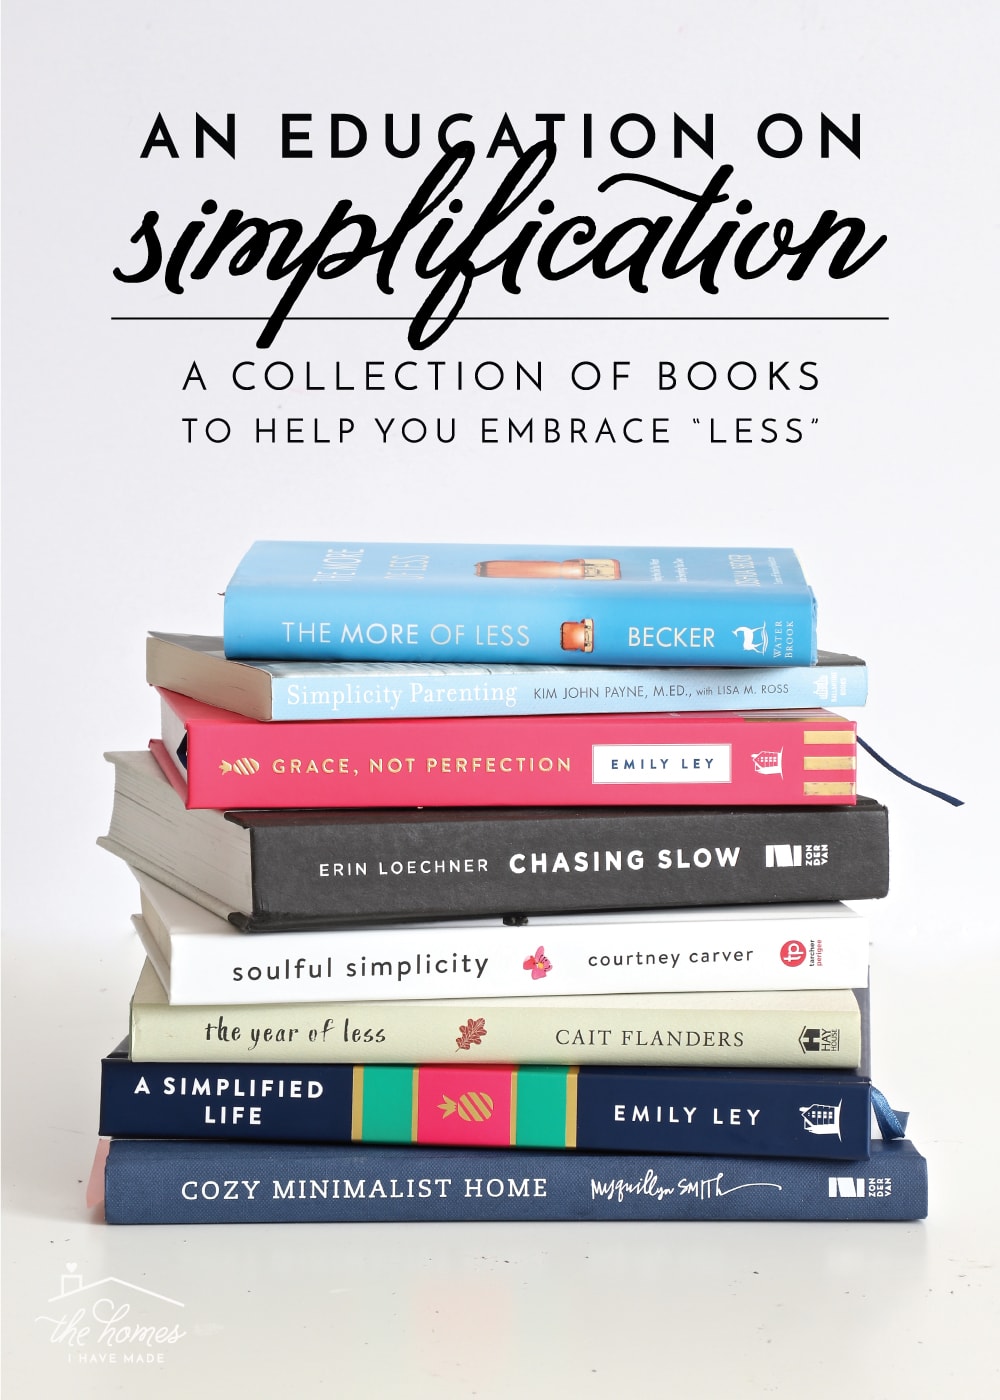 Ready to really declutter your home? Get motivated and learn how with these books on simplifying!